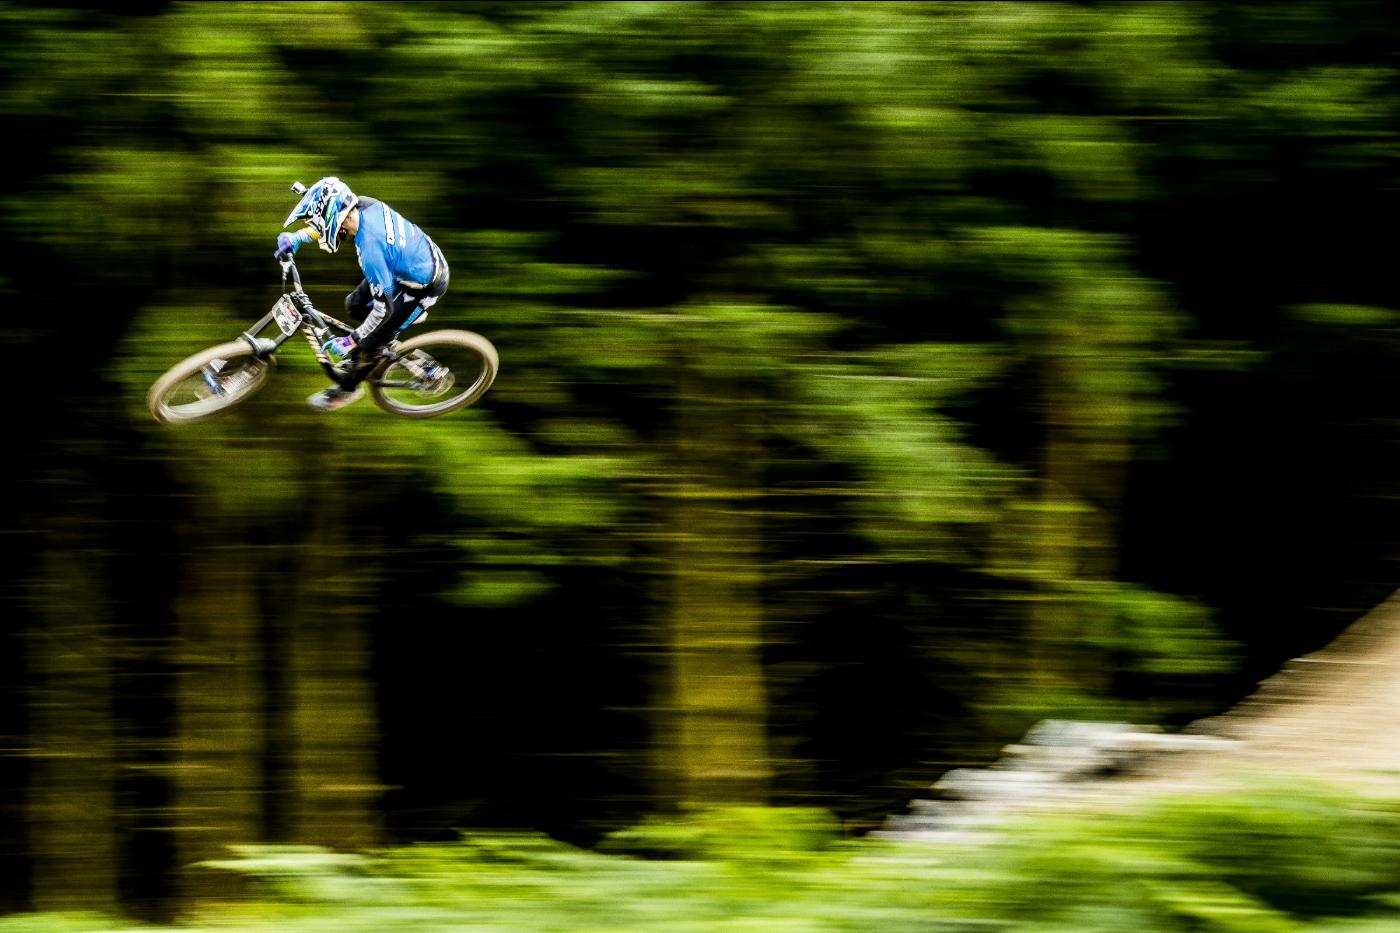 Photo courtesy of Red Bull Content Pool, shot by Sven Martin.